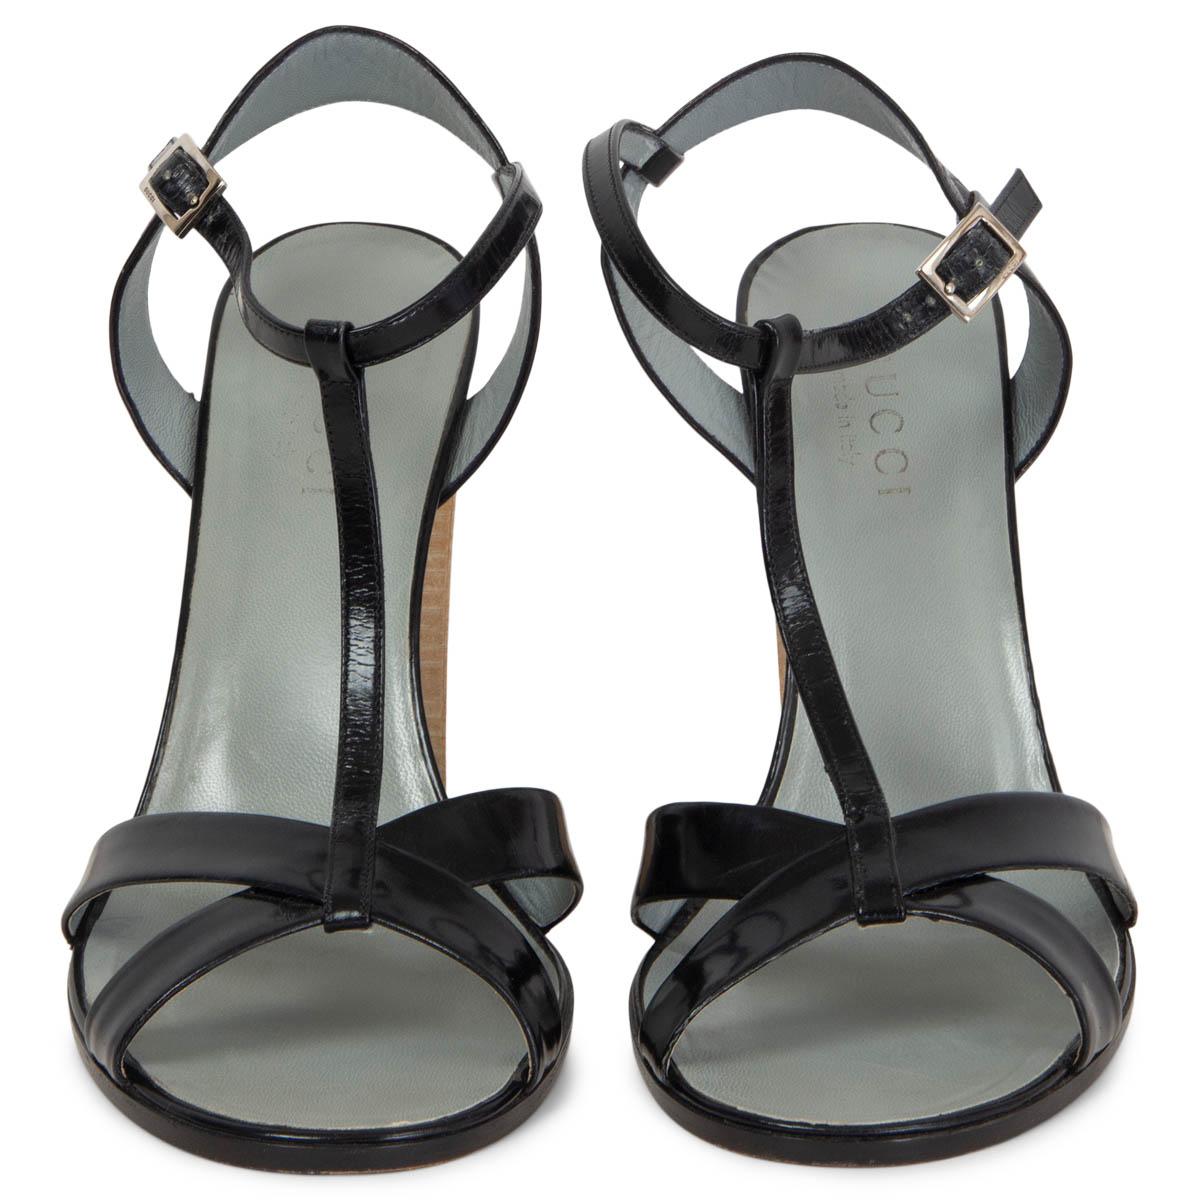 100% authentic Gucci by Tom Ford T-Strap sandals in black leather with a light beige stacked heel. Have been worn with some soft creasing to the ankle-strap. Overall in very good condition. 

Measurements
Imprinted Size	40.5
Shoe Size	40.5
Inside